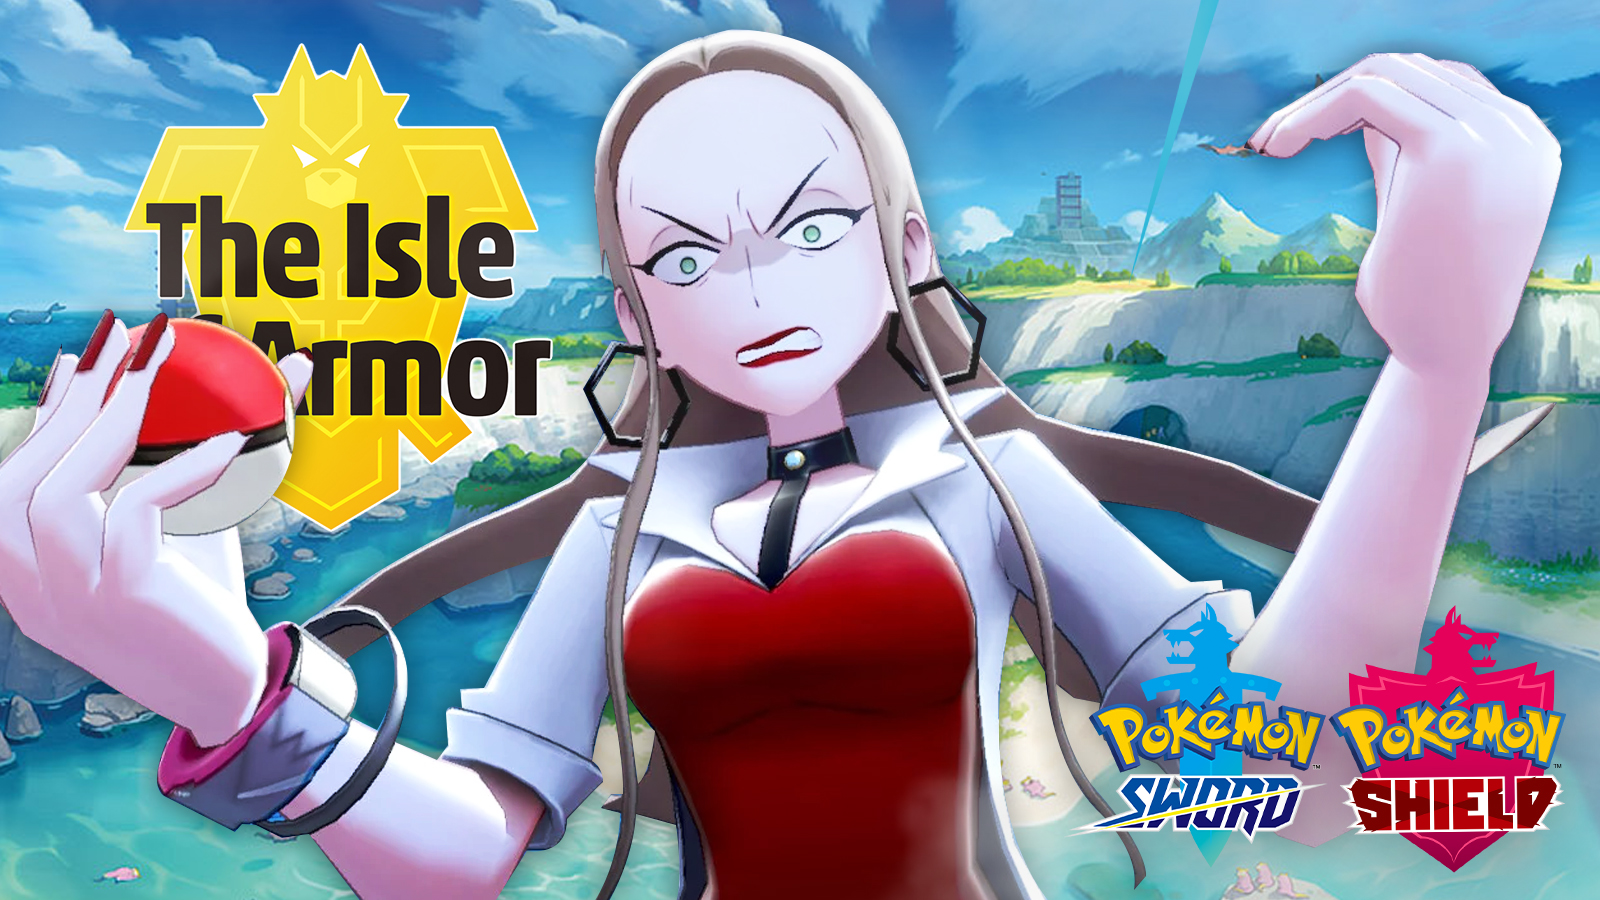 Pokemon Sword and Shield Version Exclusive Trainers and Pokemon